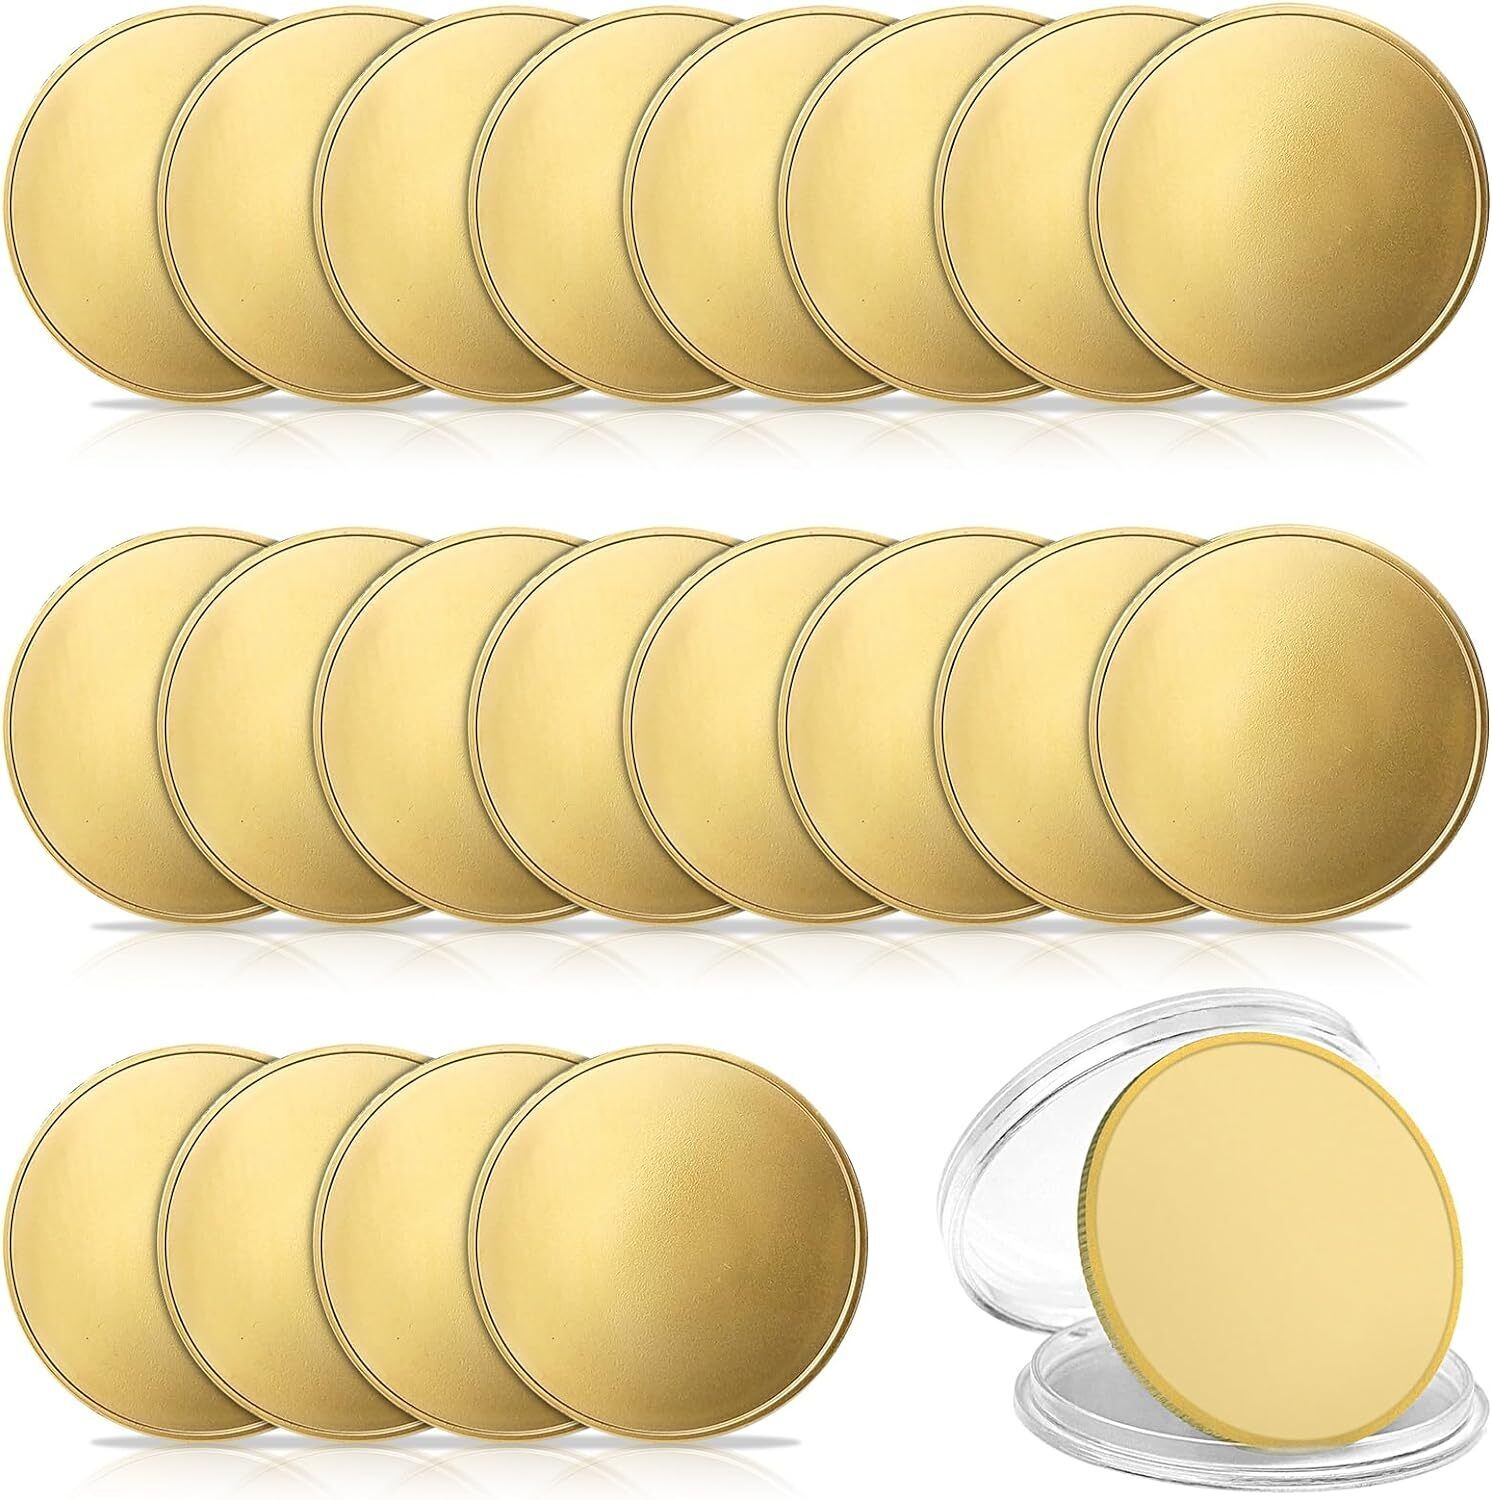 20pcs Gold Plated Blank Challenge Coin Laser Engravable Pattern for DIY Crafts